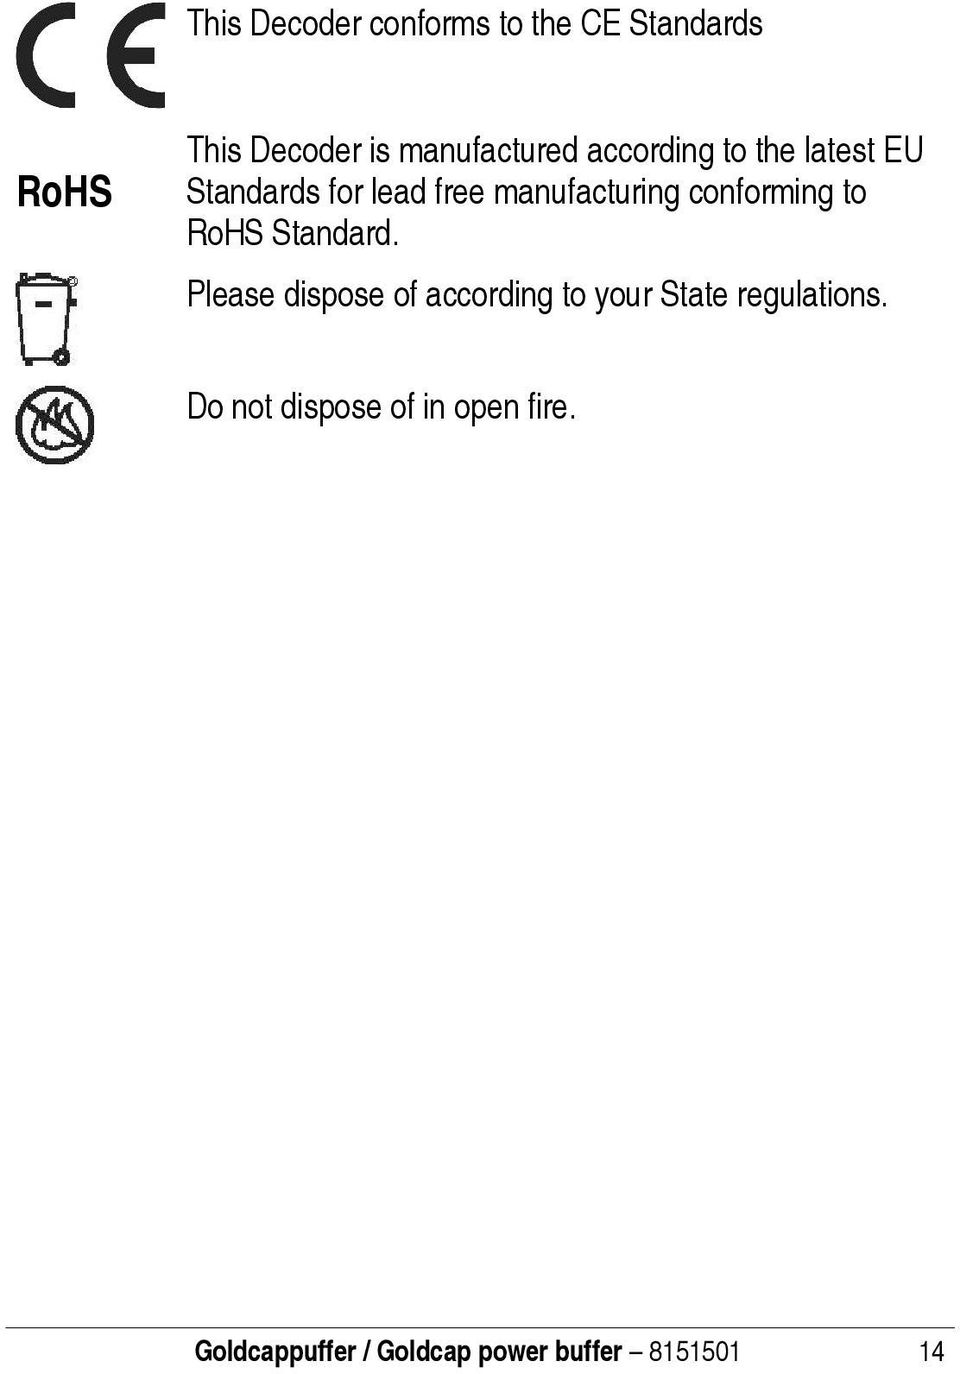 to RoHS Standard. Please dispose of according to your State regulations.